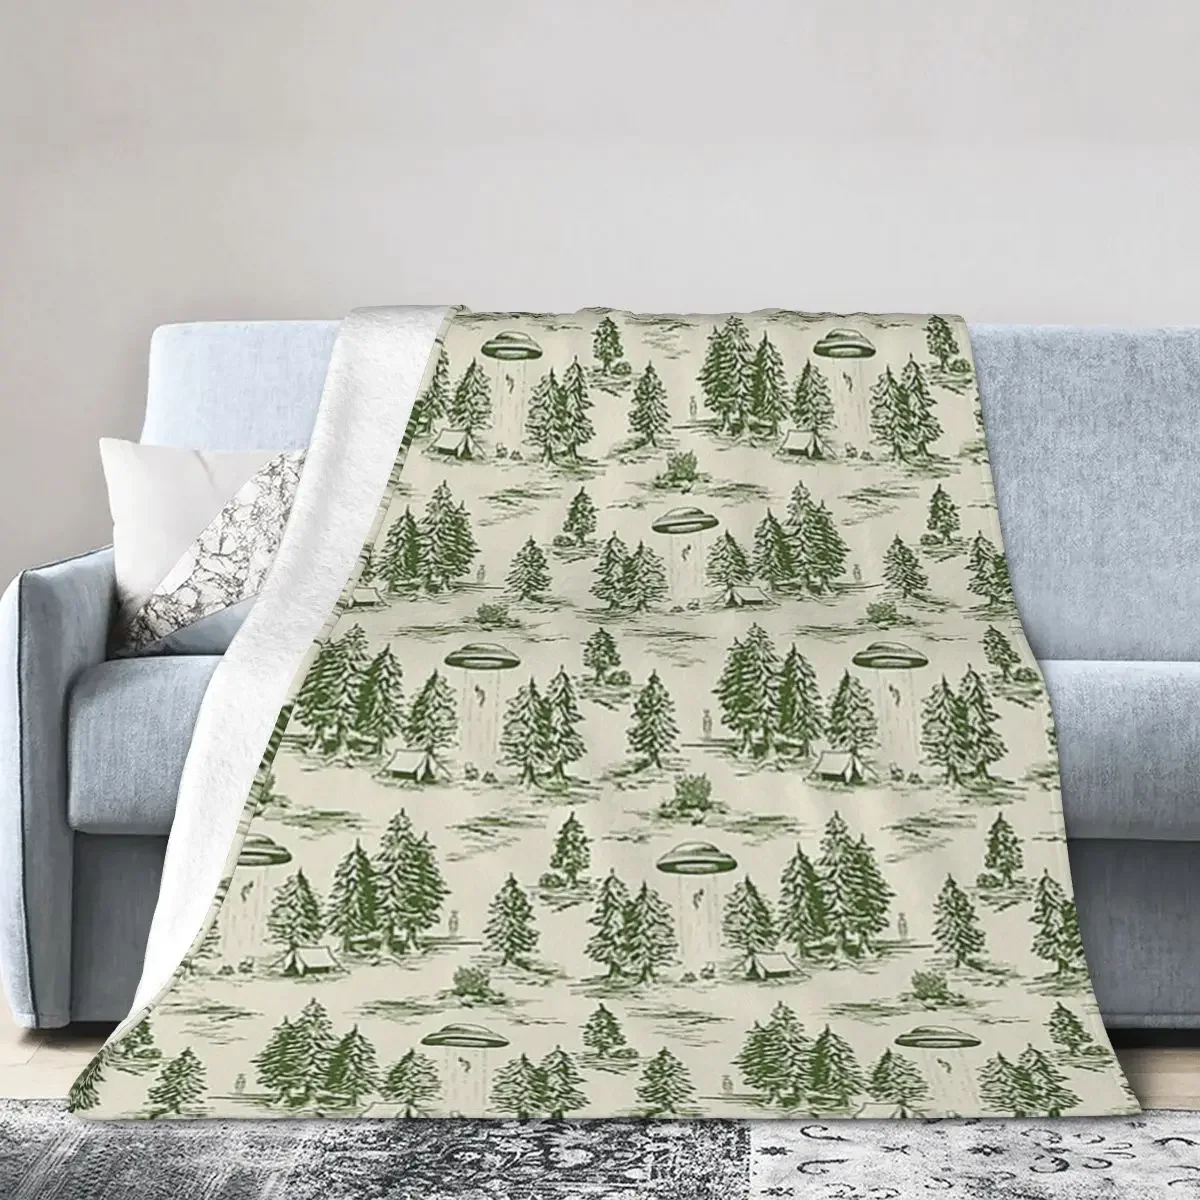 

Green Alien Abduction Toile De Jouy Pattern Blankets Soft Warm Flannel Throw Blanket Bedding for Bed Living room Picnic Home